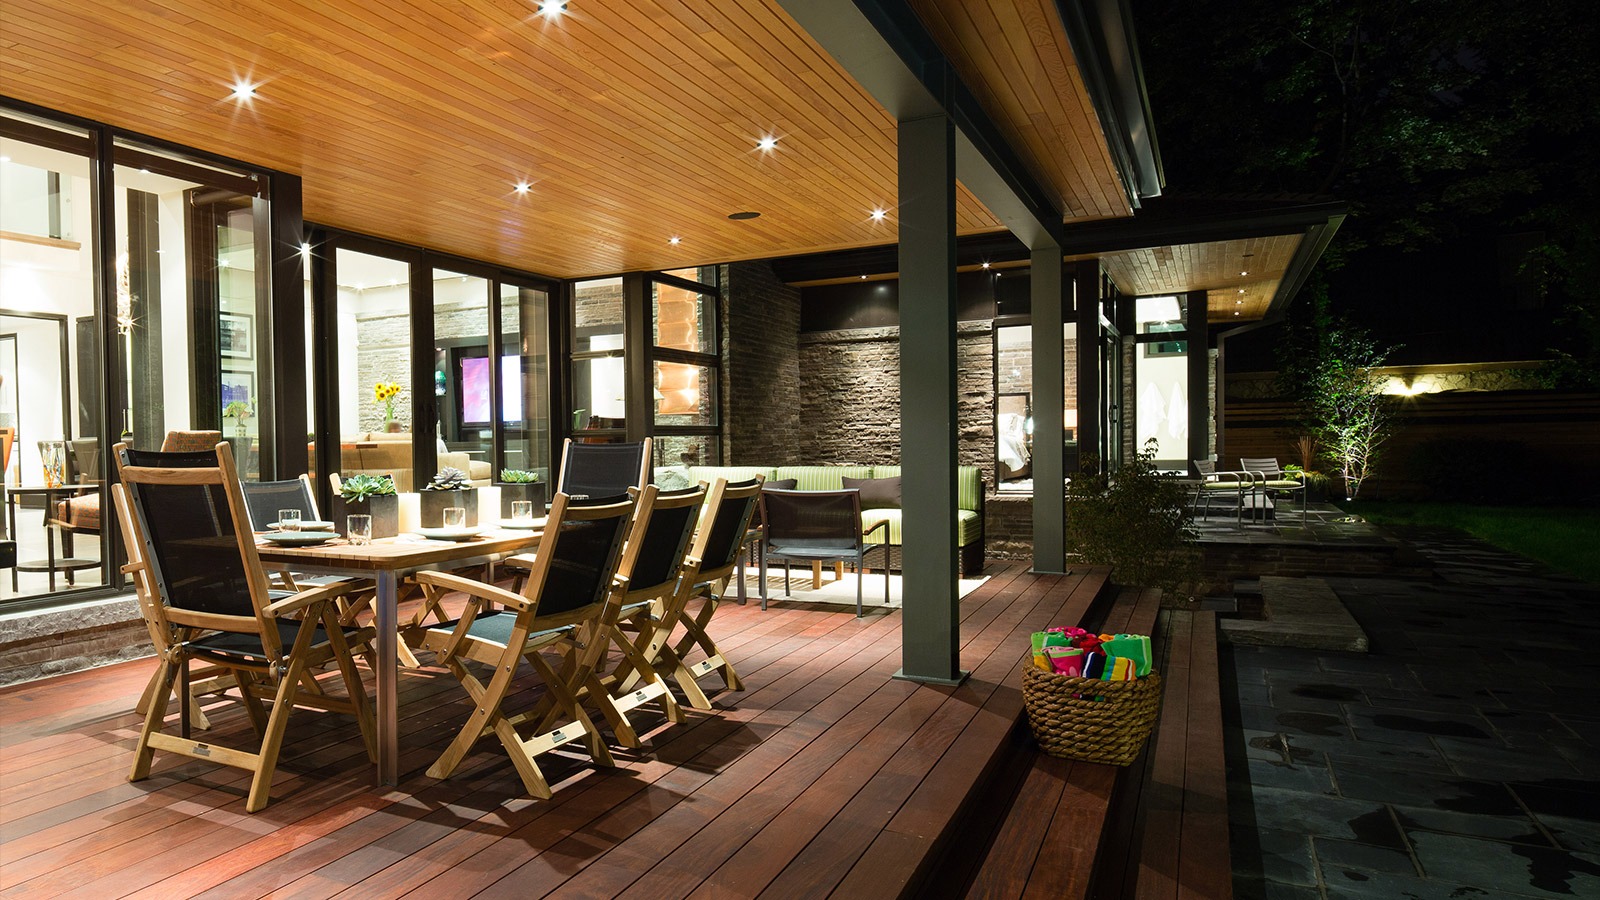 Outdoor deck with wood floor, steel columns and wood dining table.